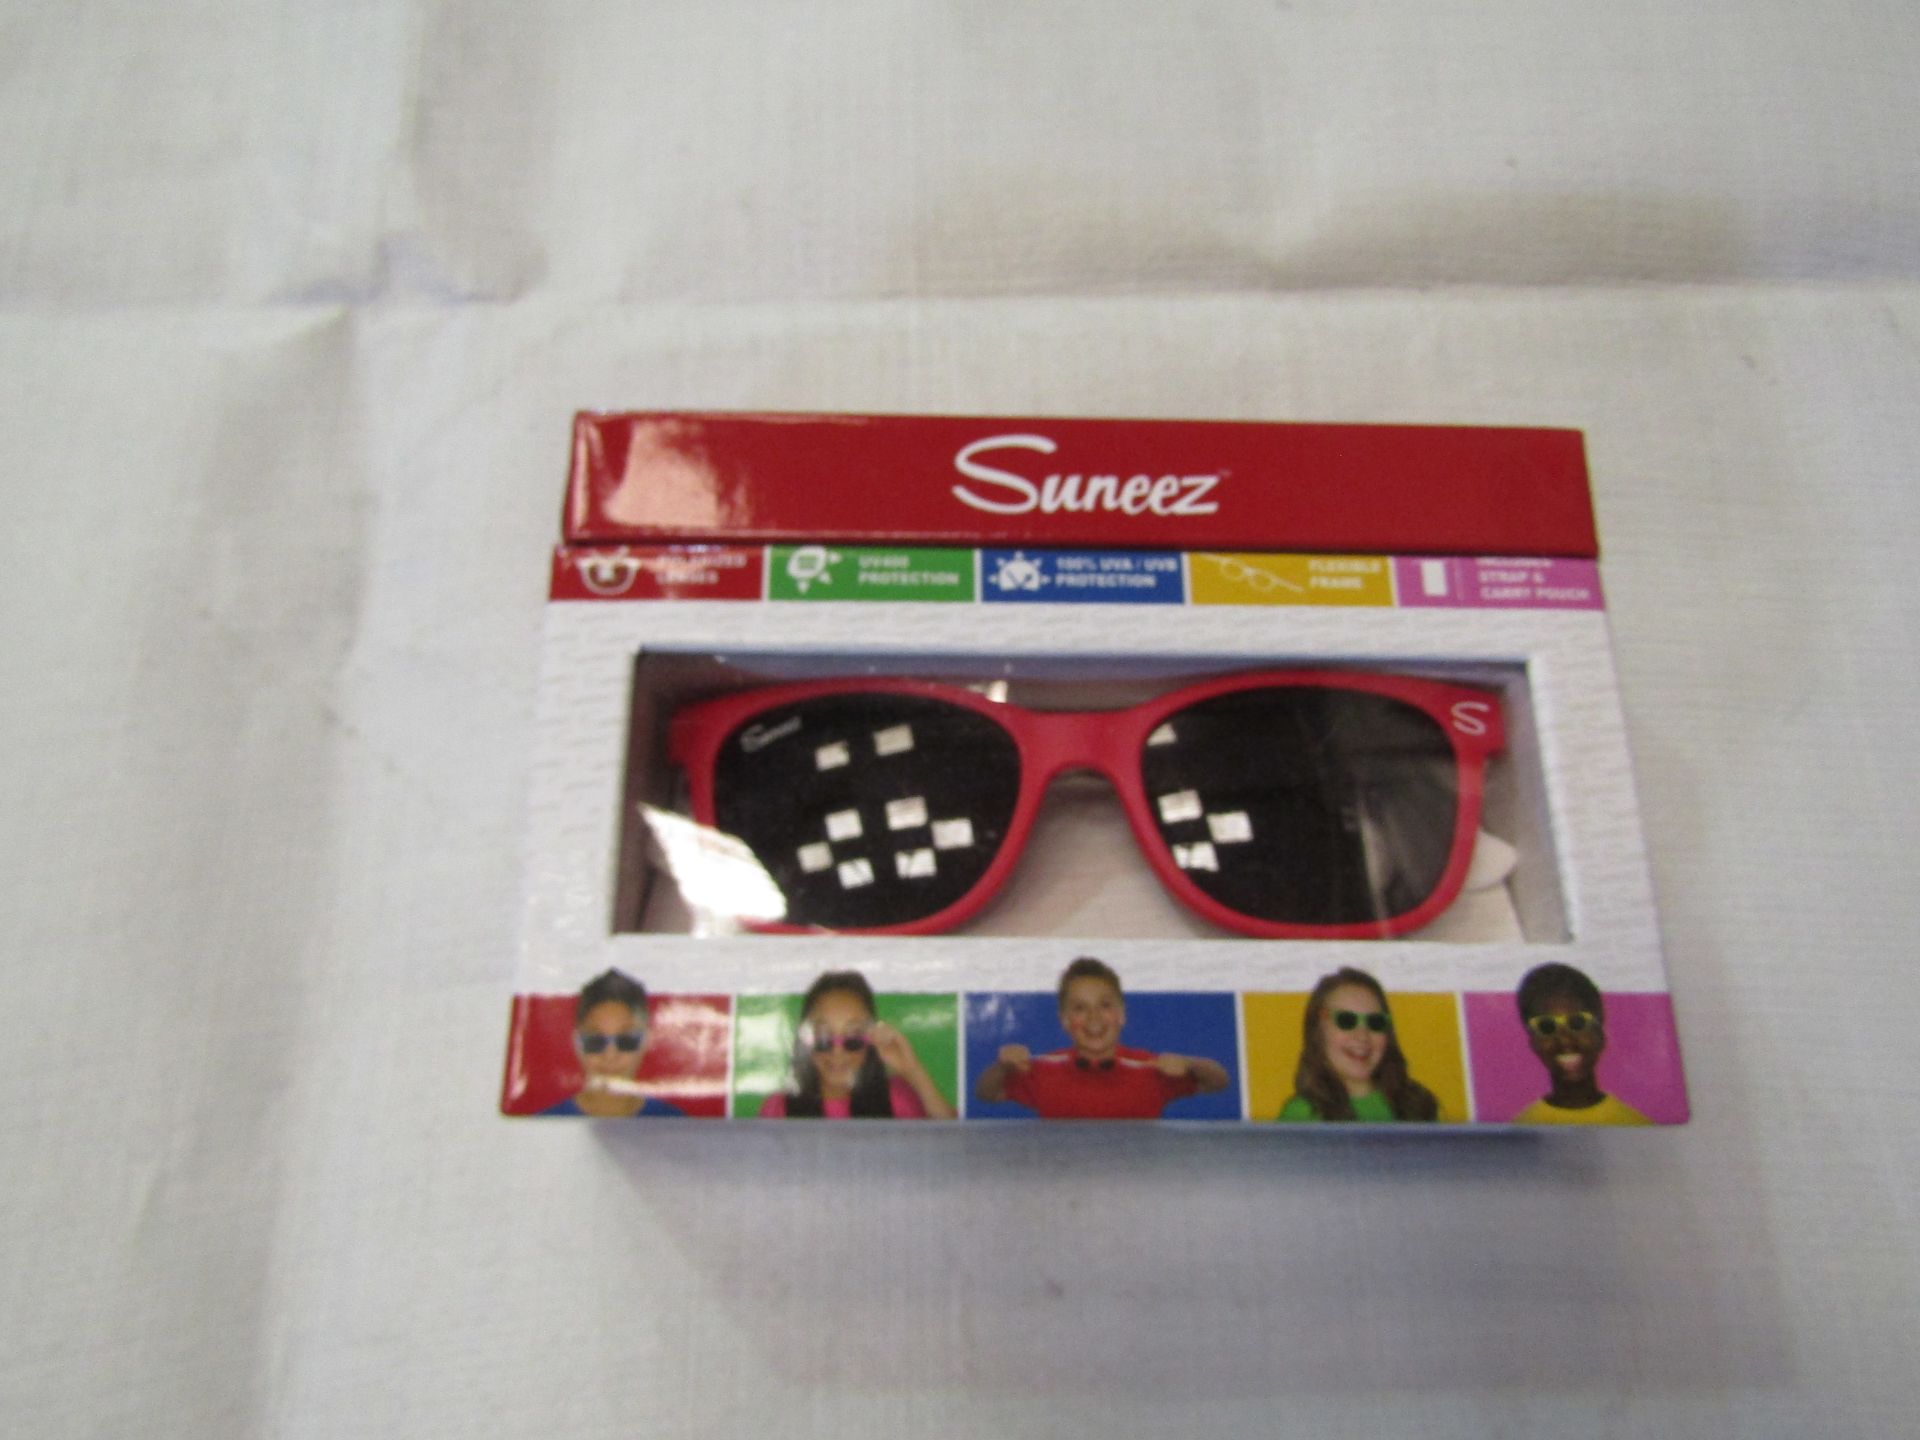 10x Suneez Sun Glasses, Red - New & Boxed.